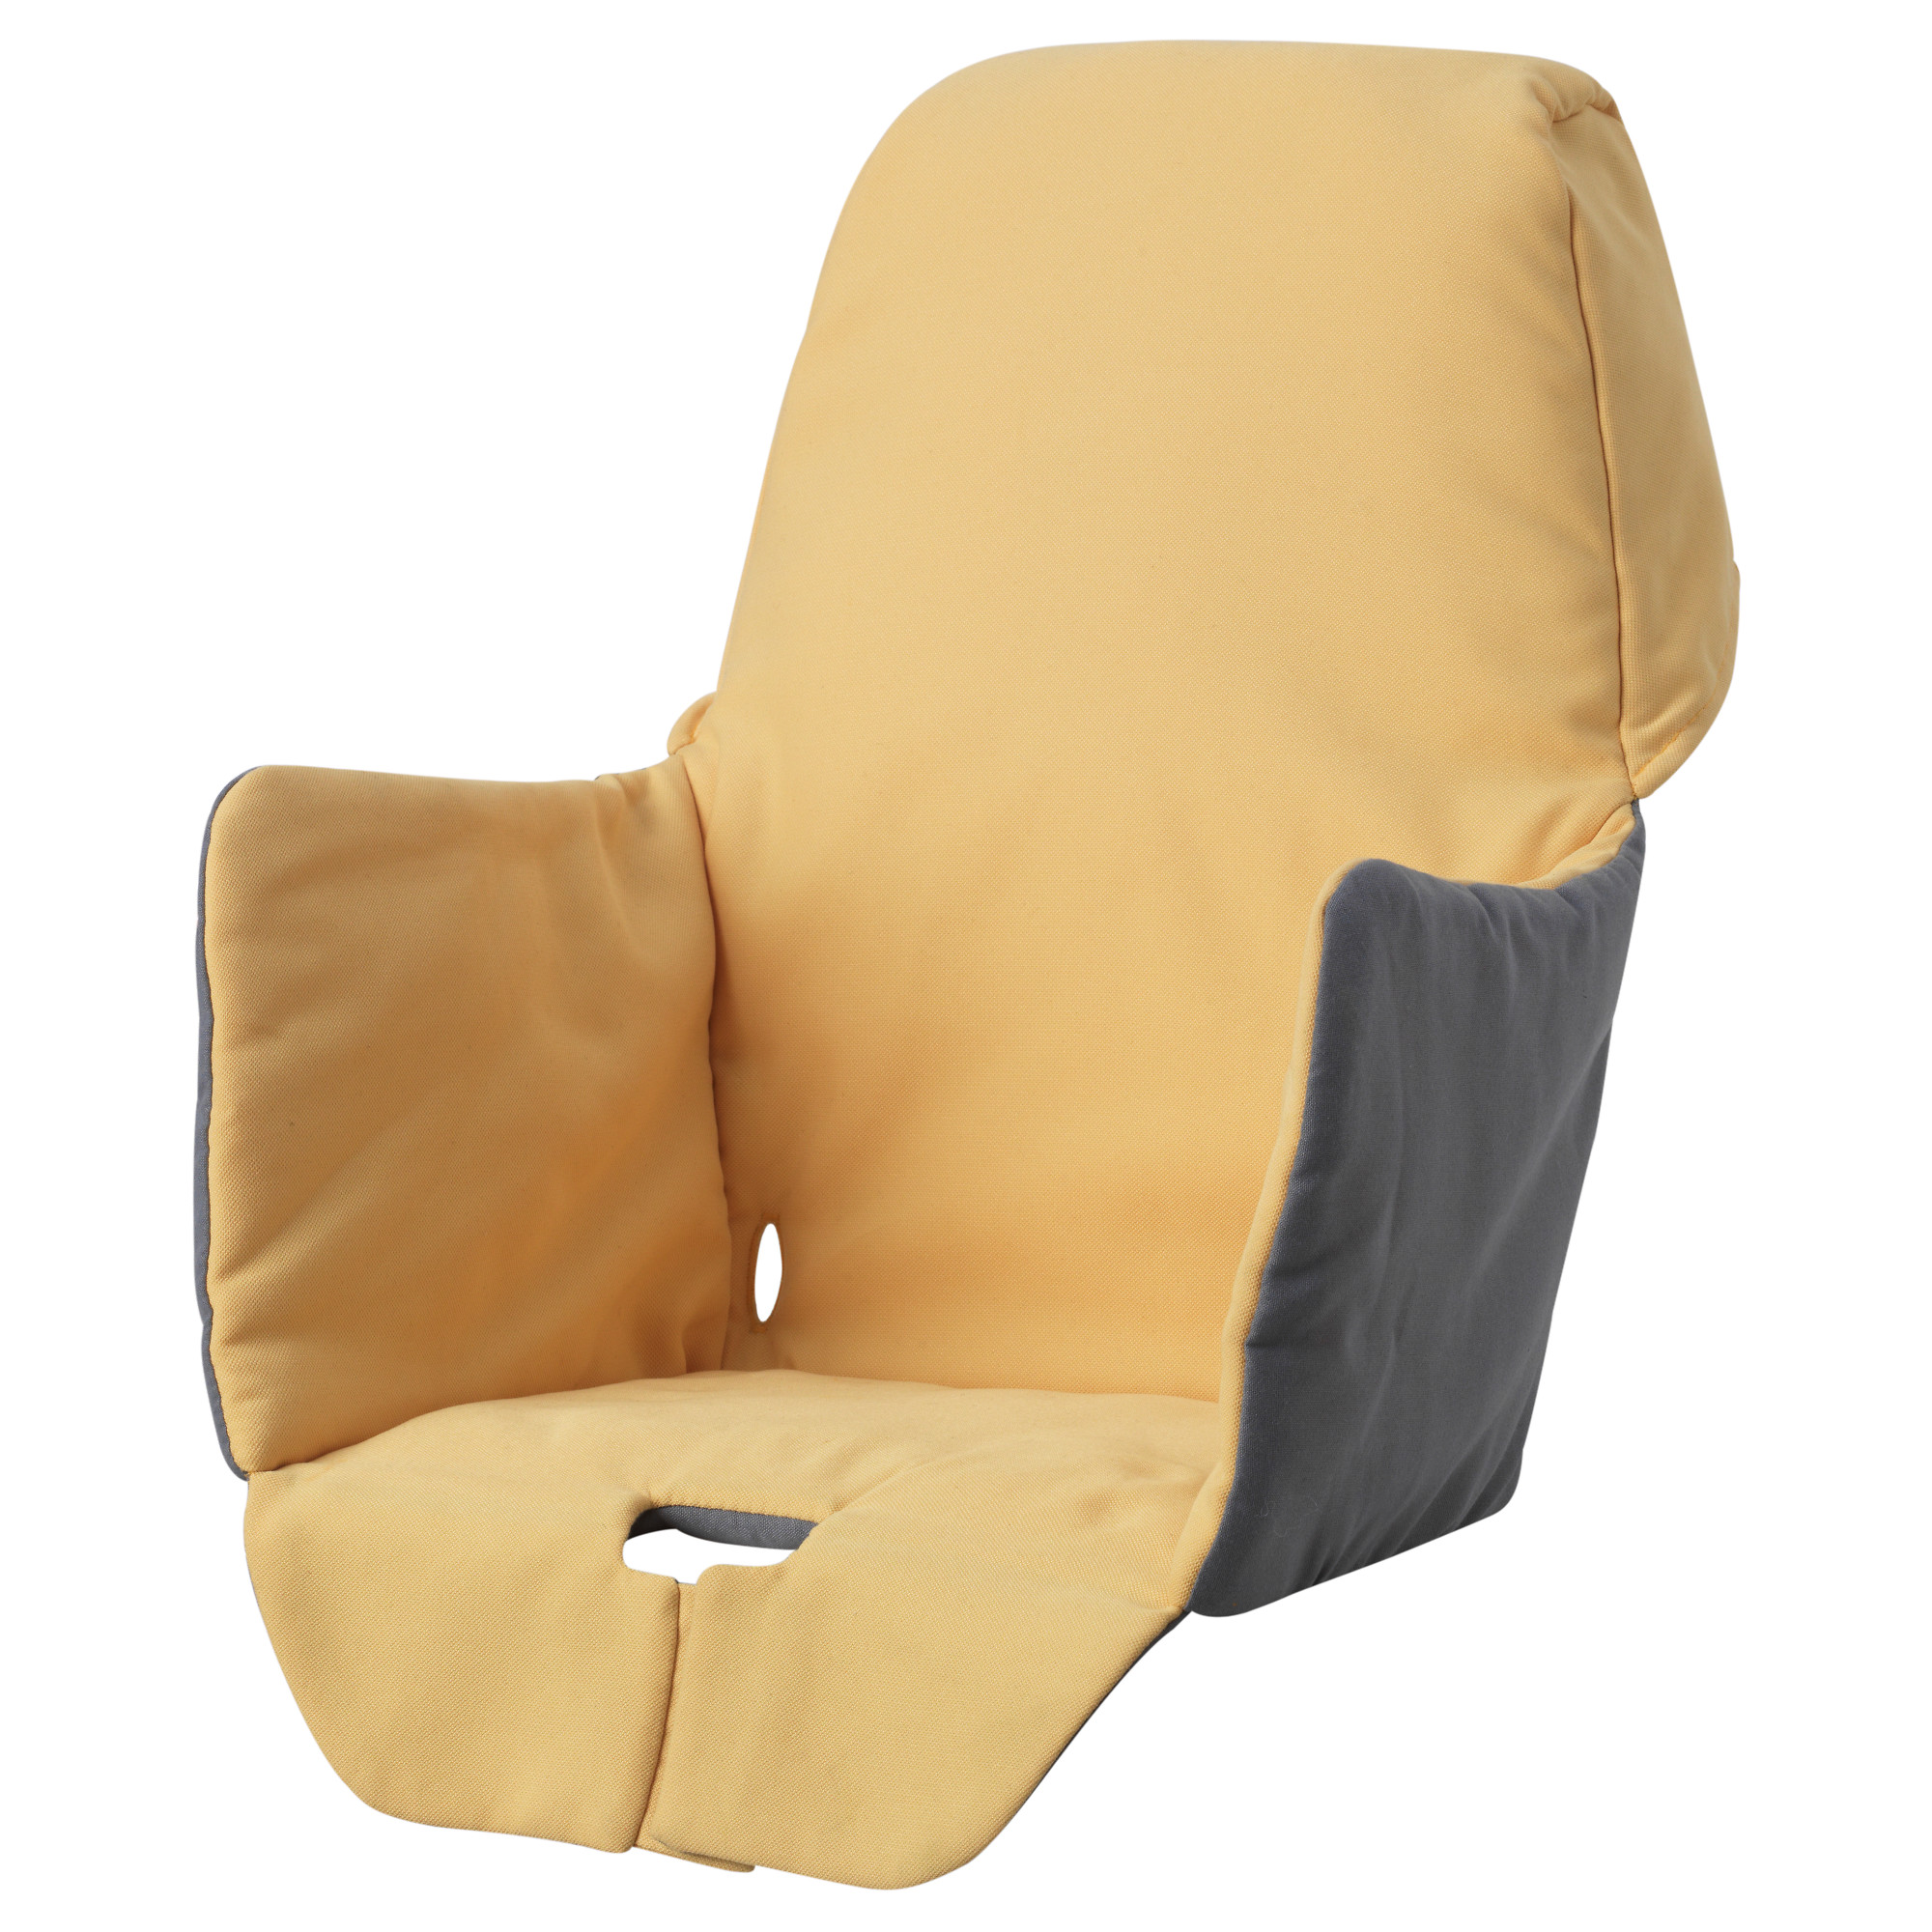 LANGUR padded seat cover for highchair